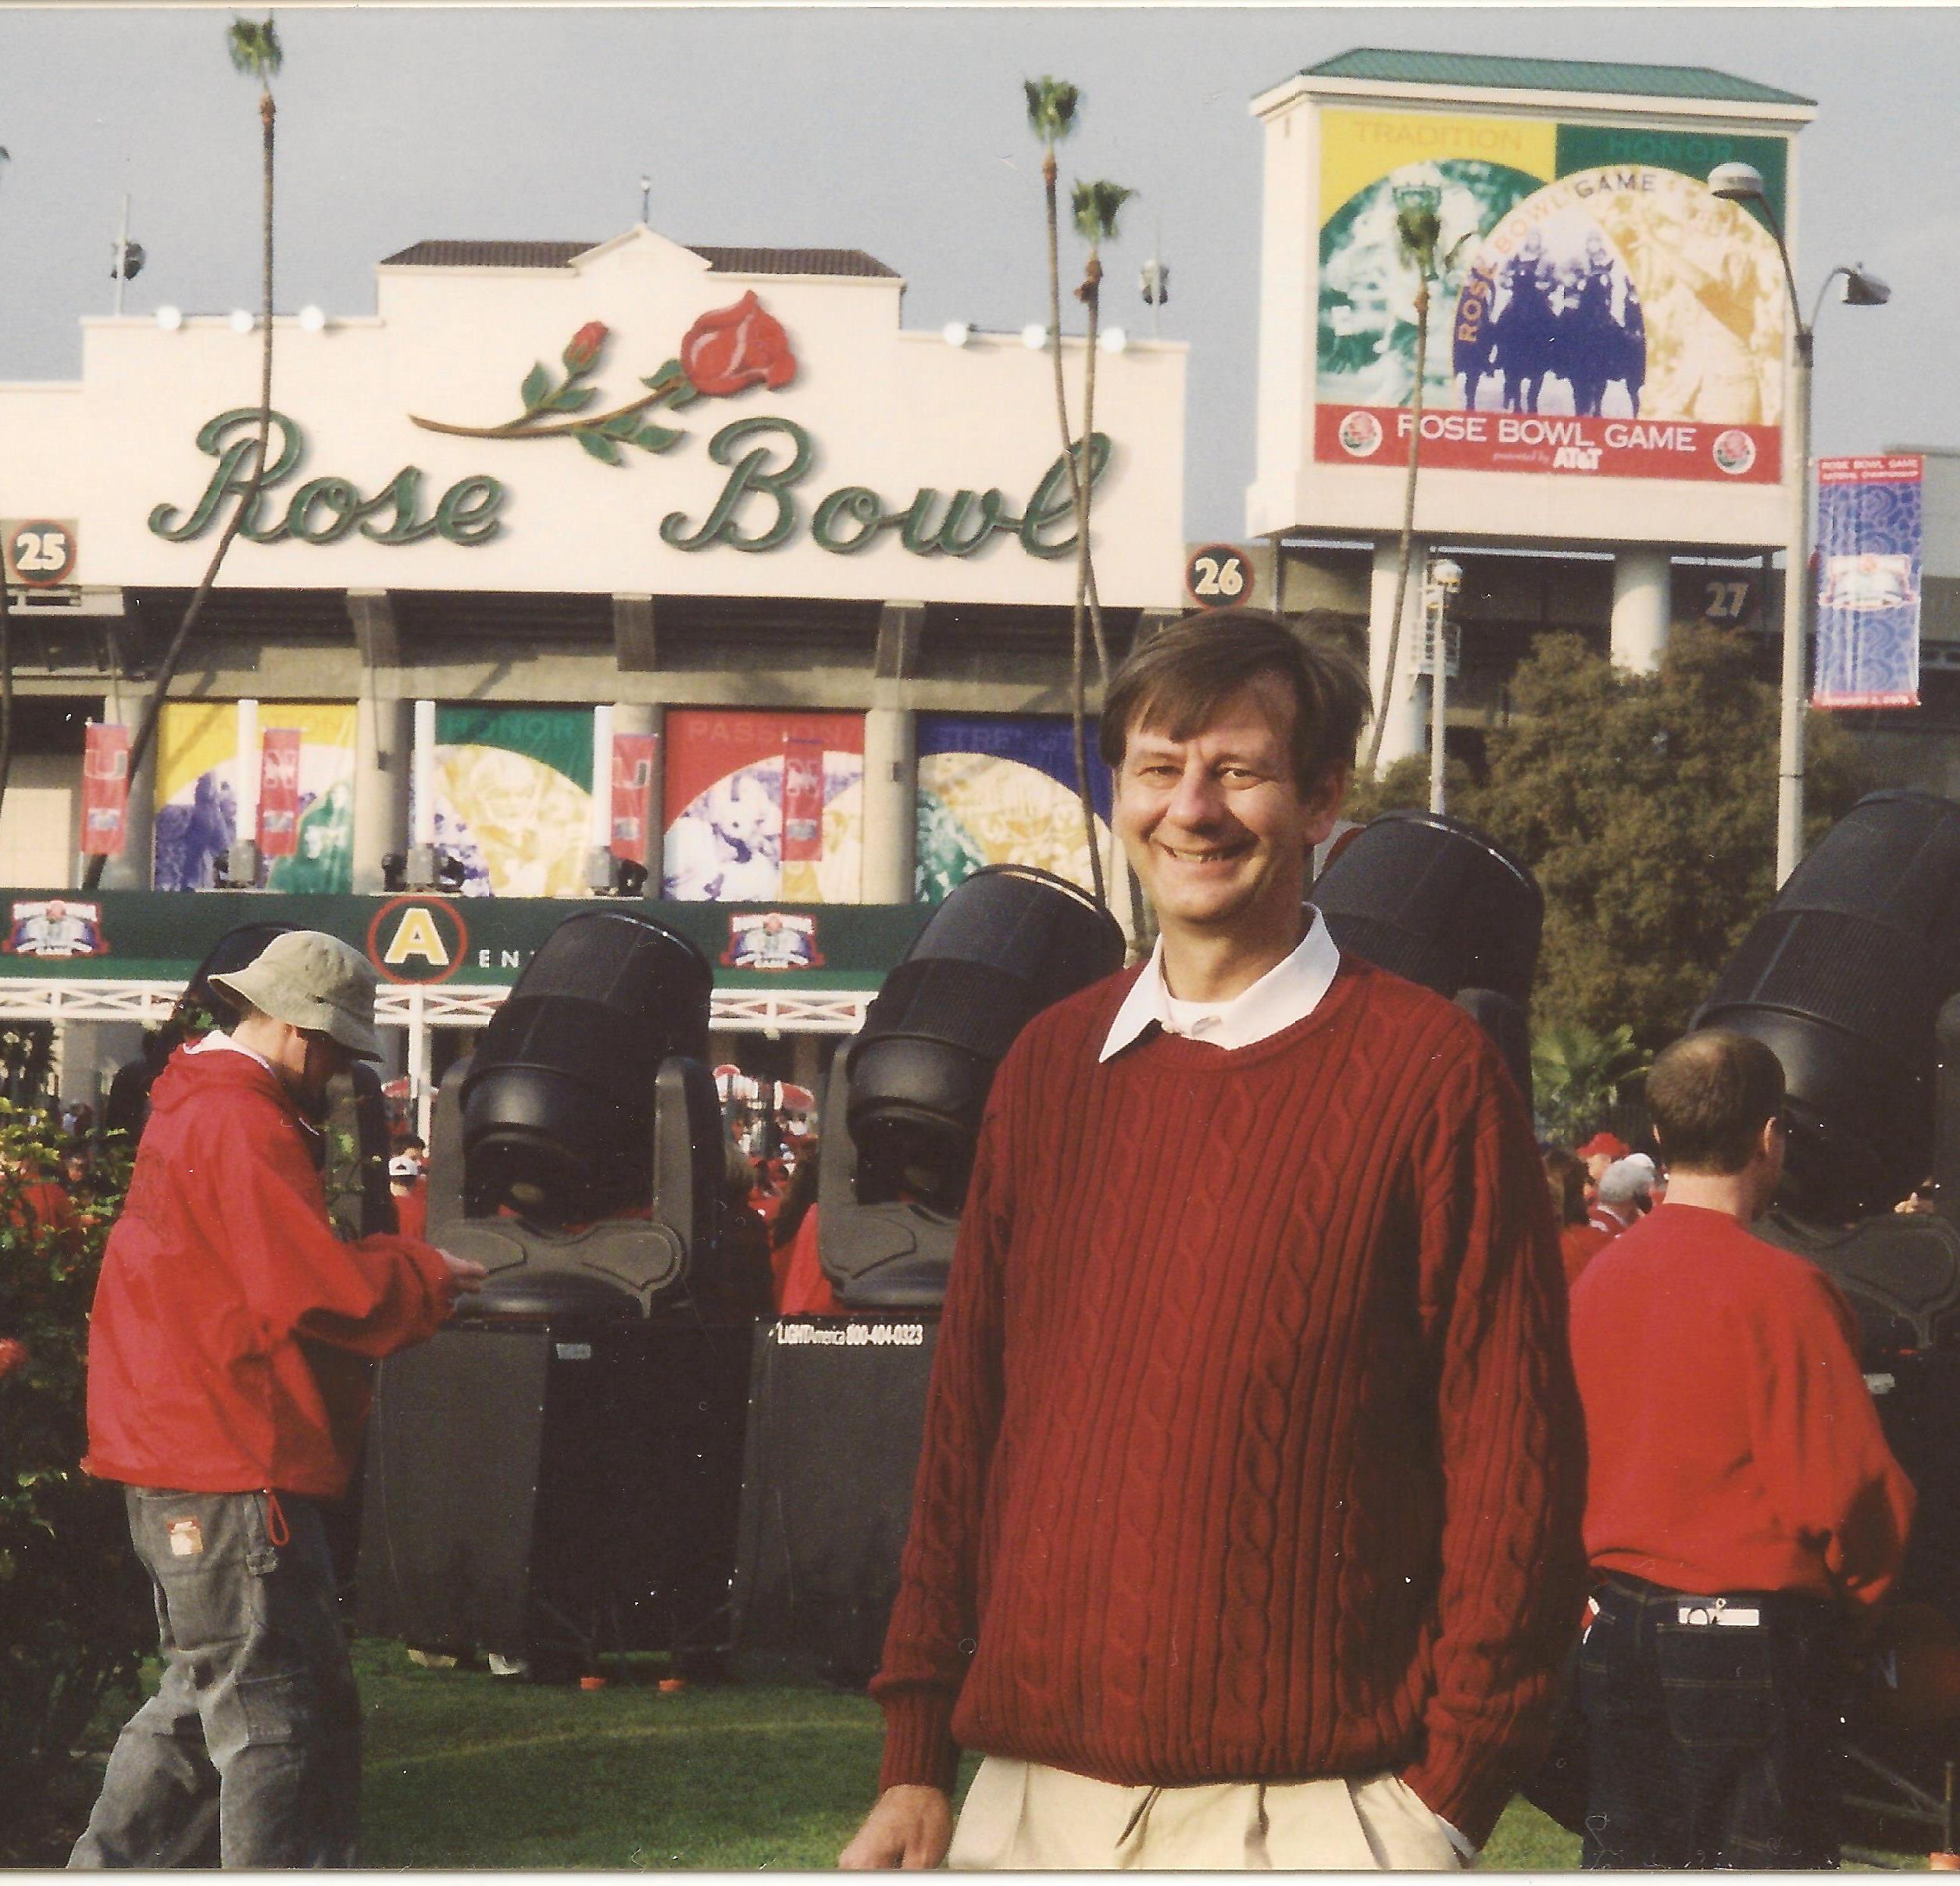 Gus Rhodes in Pasadena for the Tournament of Roses Parade and the Rose Bowl Game